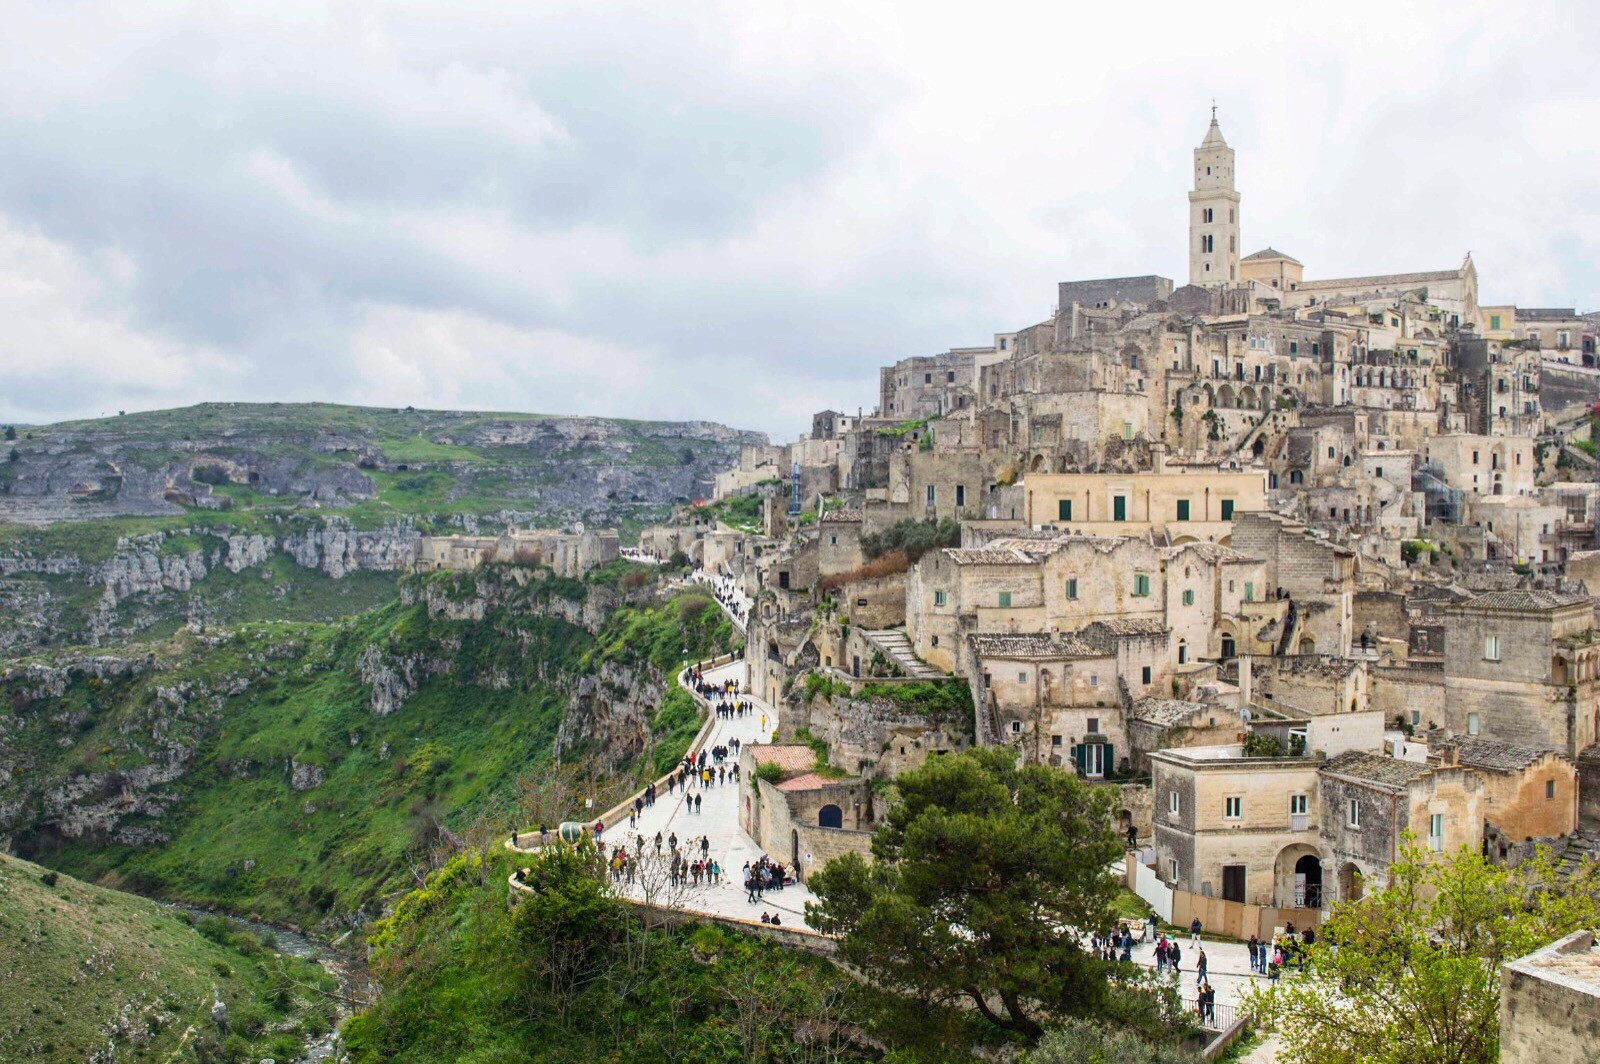 Monday in the rocks of Matera...